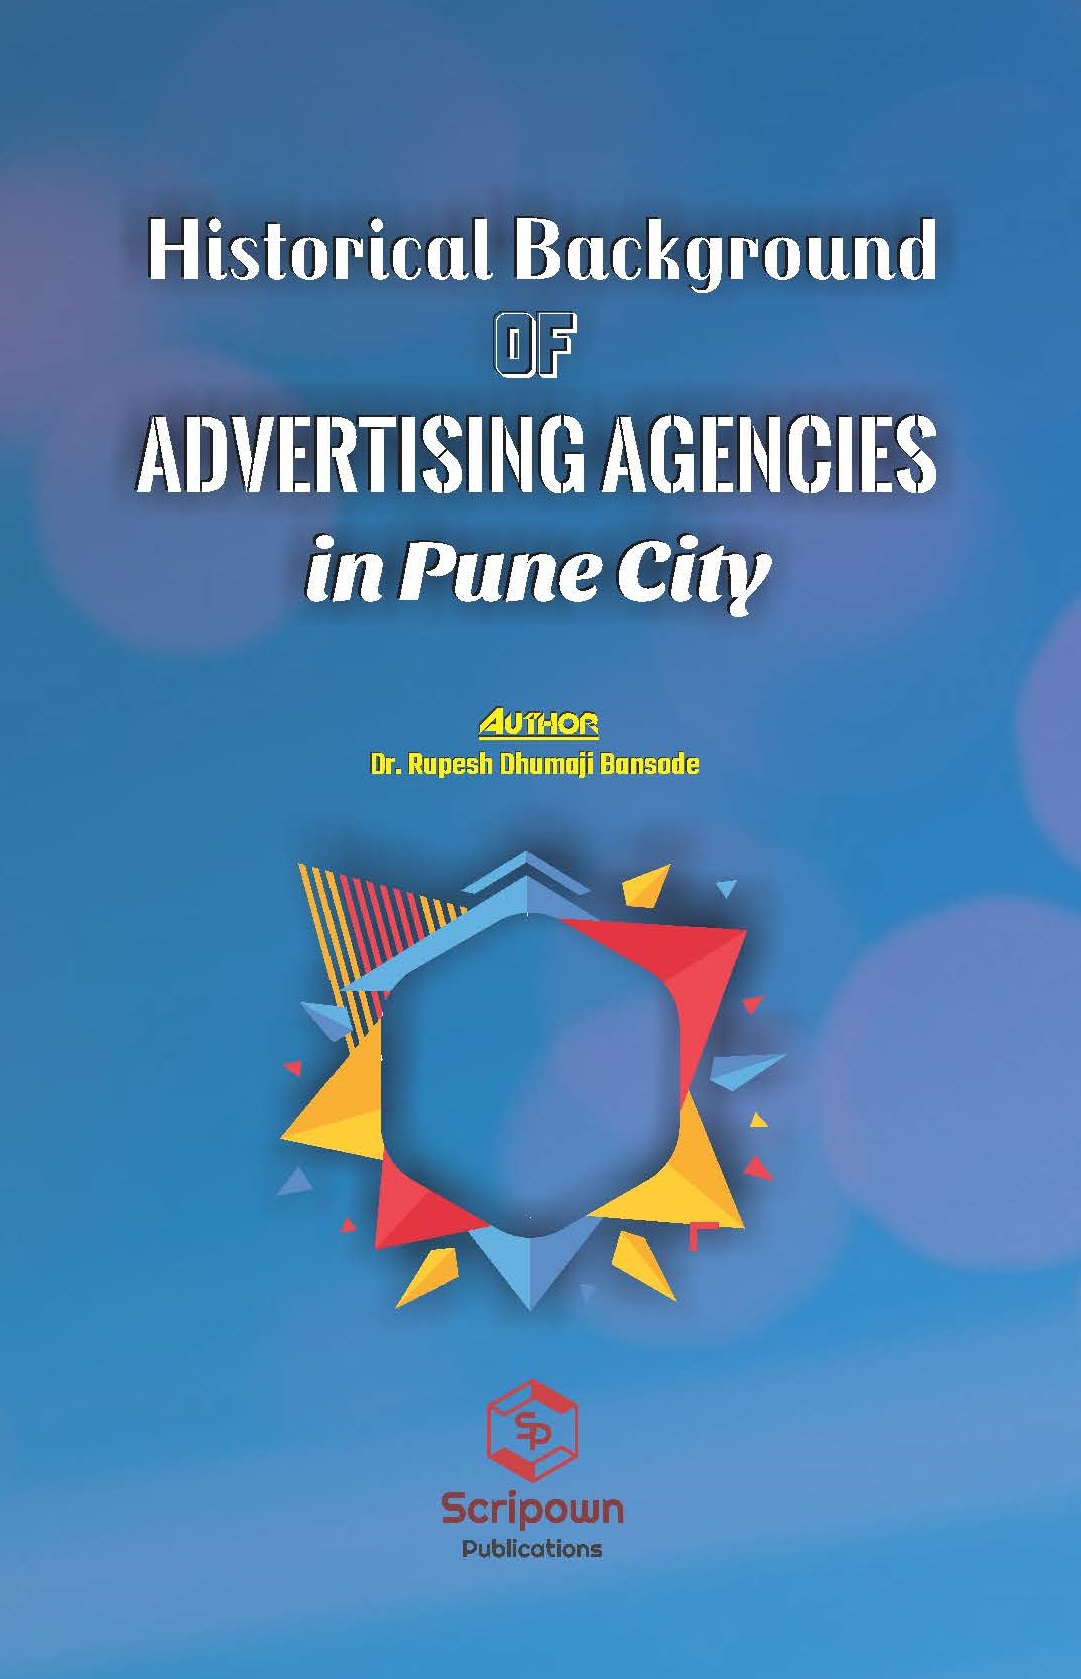 Historical Background of Advertising Agencies in Pune City